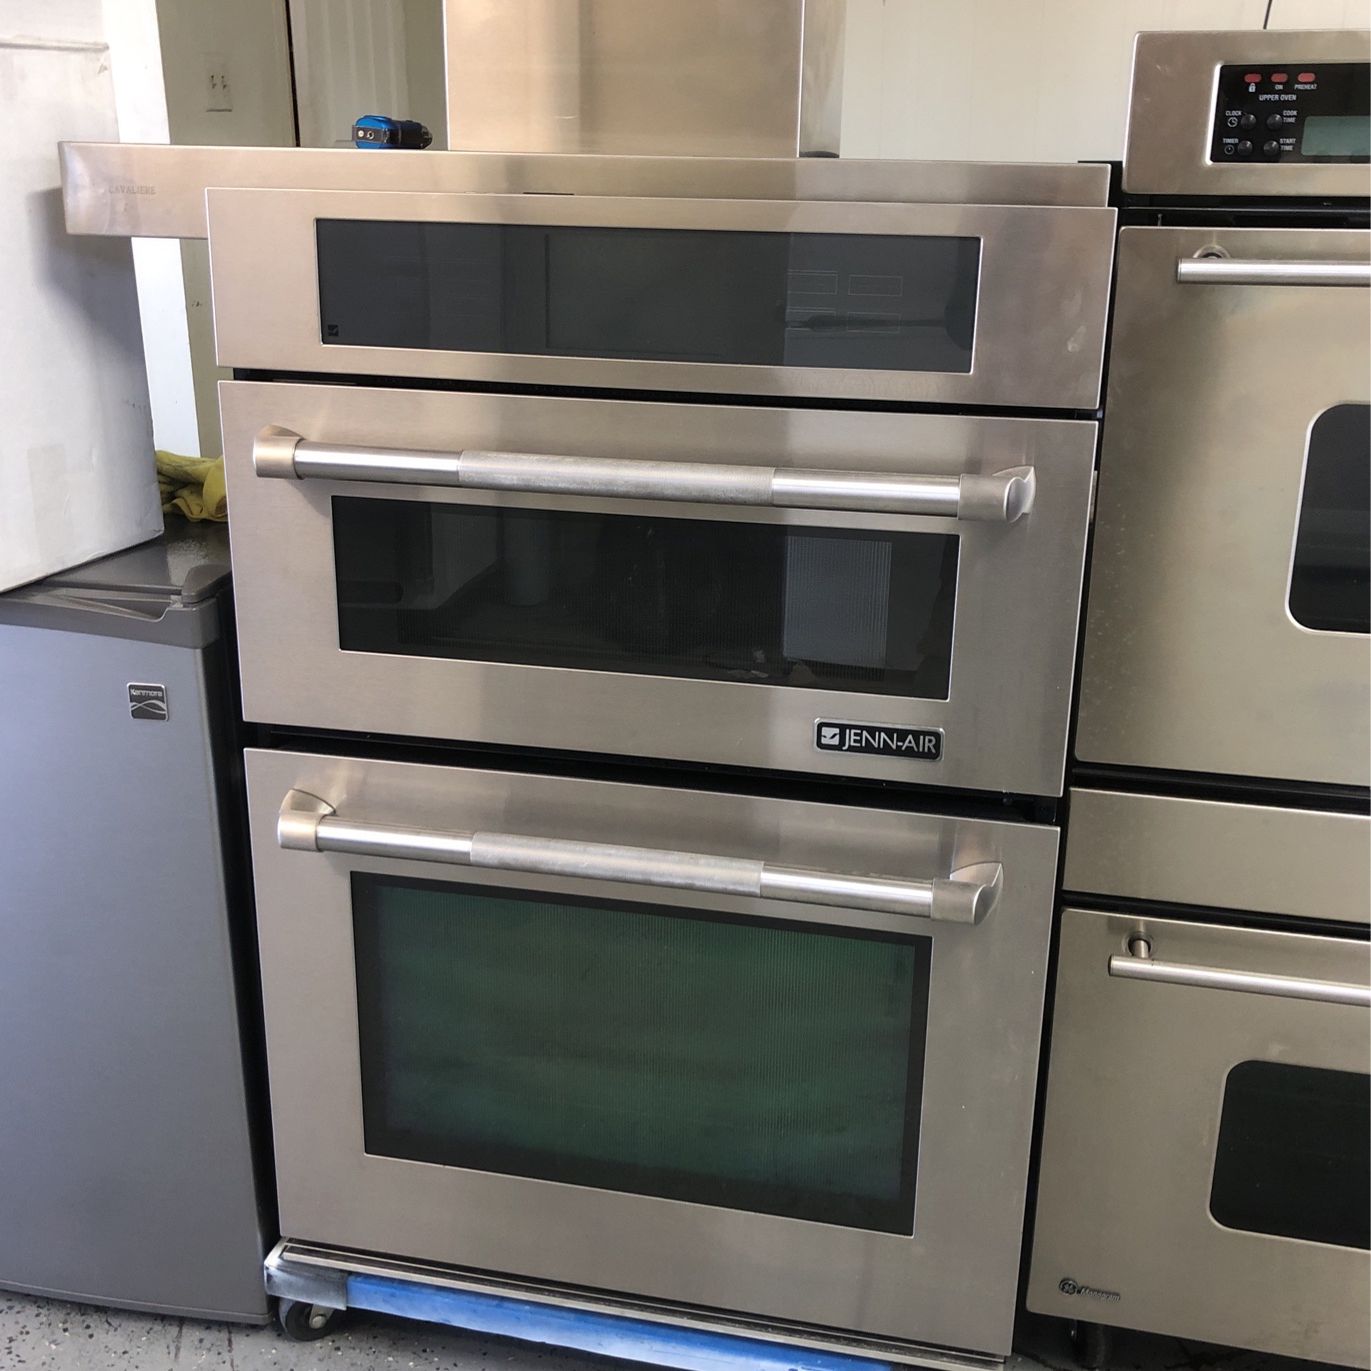 Jenn Air 30”Wide Stainless Steel Microwave Oven Combo 